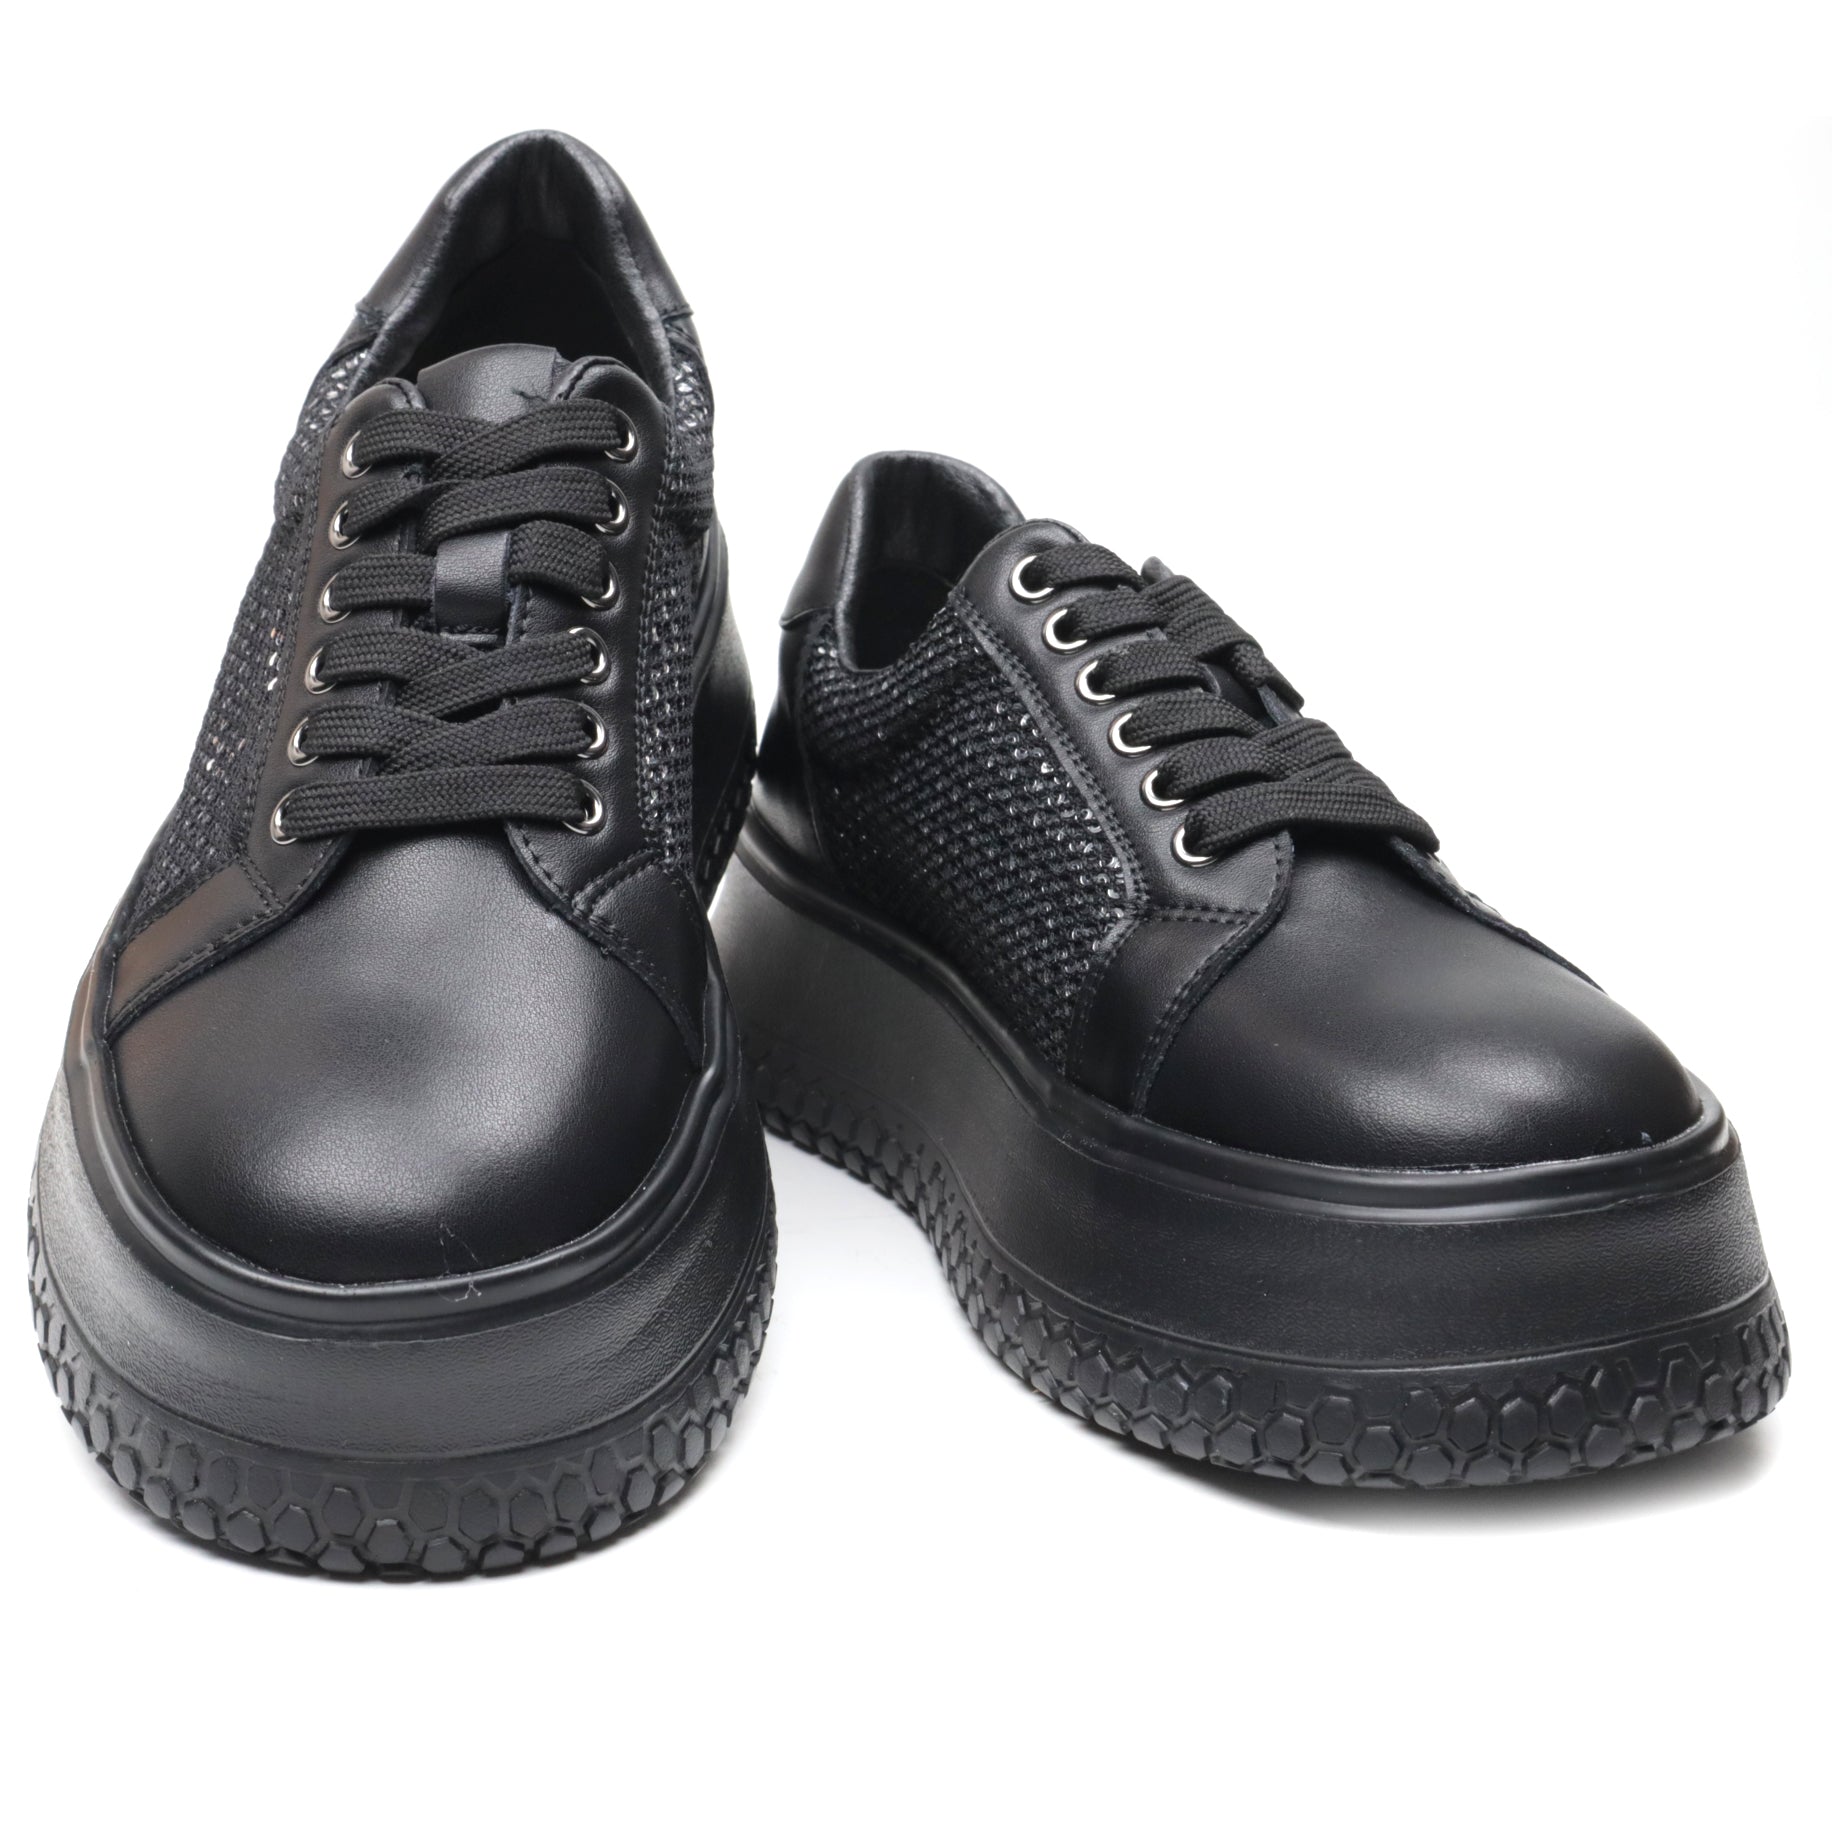 Pass Collection Sneakers dama W1W140022A 01 Z negru ID3999-NG